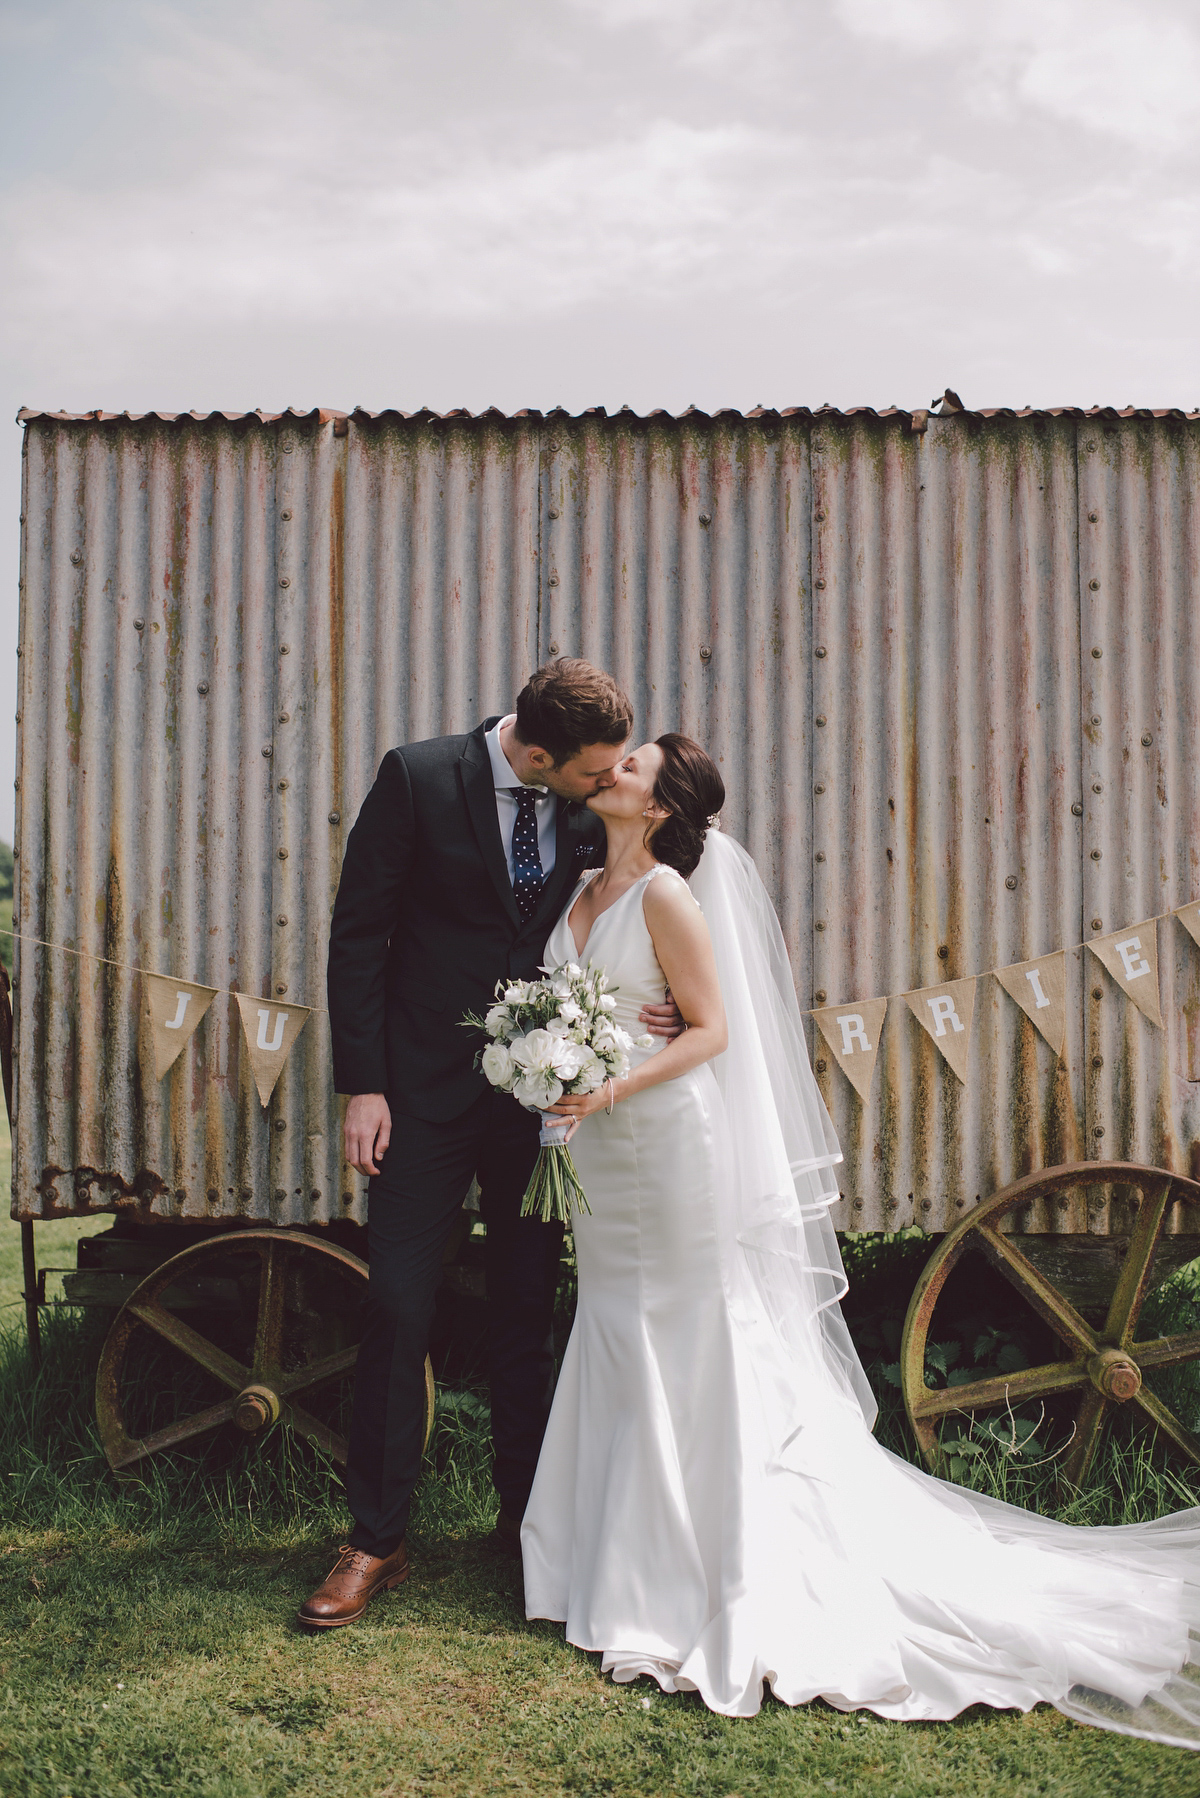 Bride Nina wore a Sincerity gown for her rustic and handmade Spring country barn wedding. Photography by Roberta Matis.